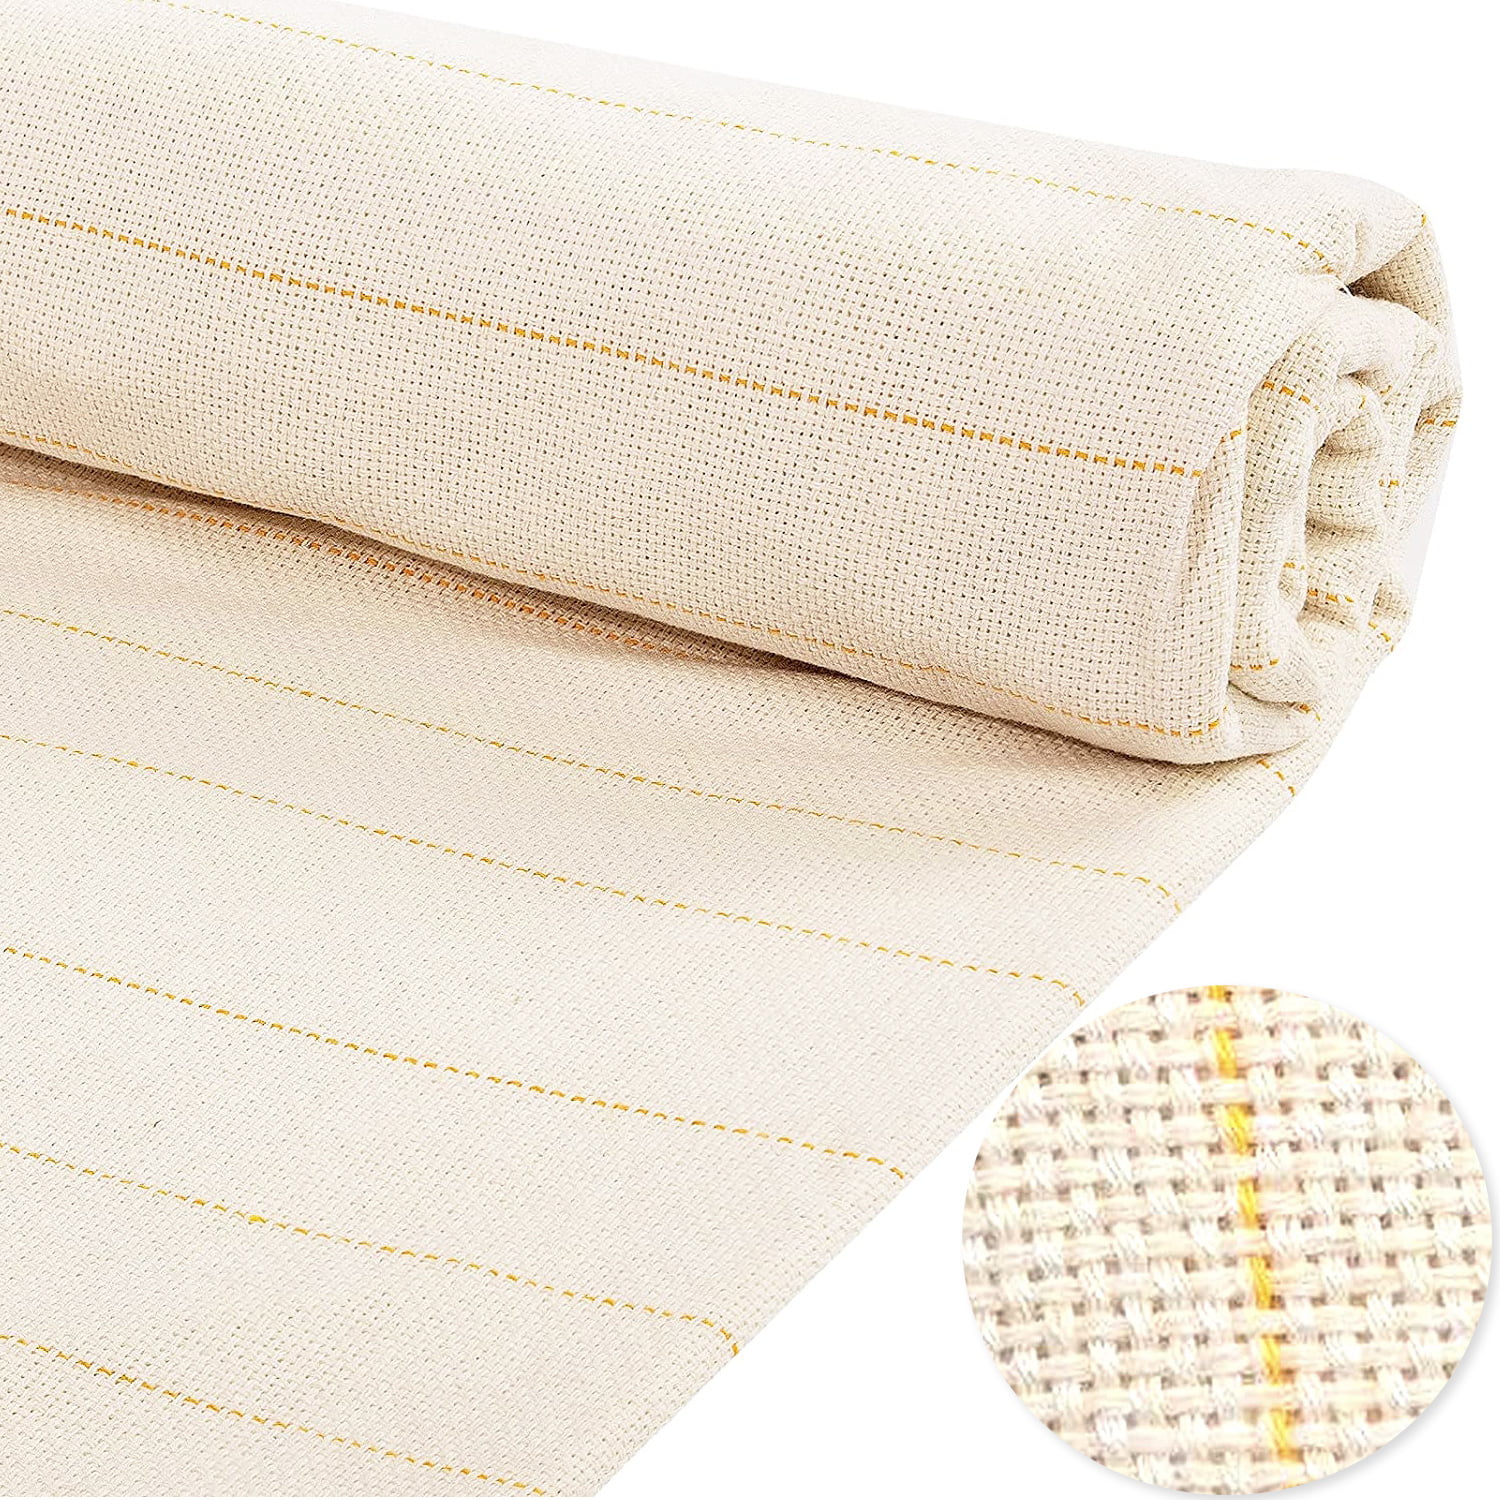  Silvertree 79x59 Inch Tufting Cloth with Yellow Marked Lines,  79x59 Inch Non Slip Final Backing Cloth Tufting Kit, Tufting Cloth with  Backing for Cut Pile Tufting Gun Tufting Supplies (79x59)